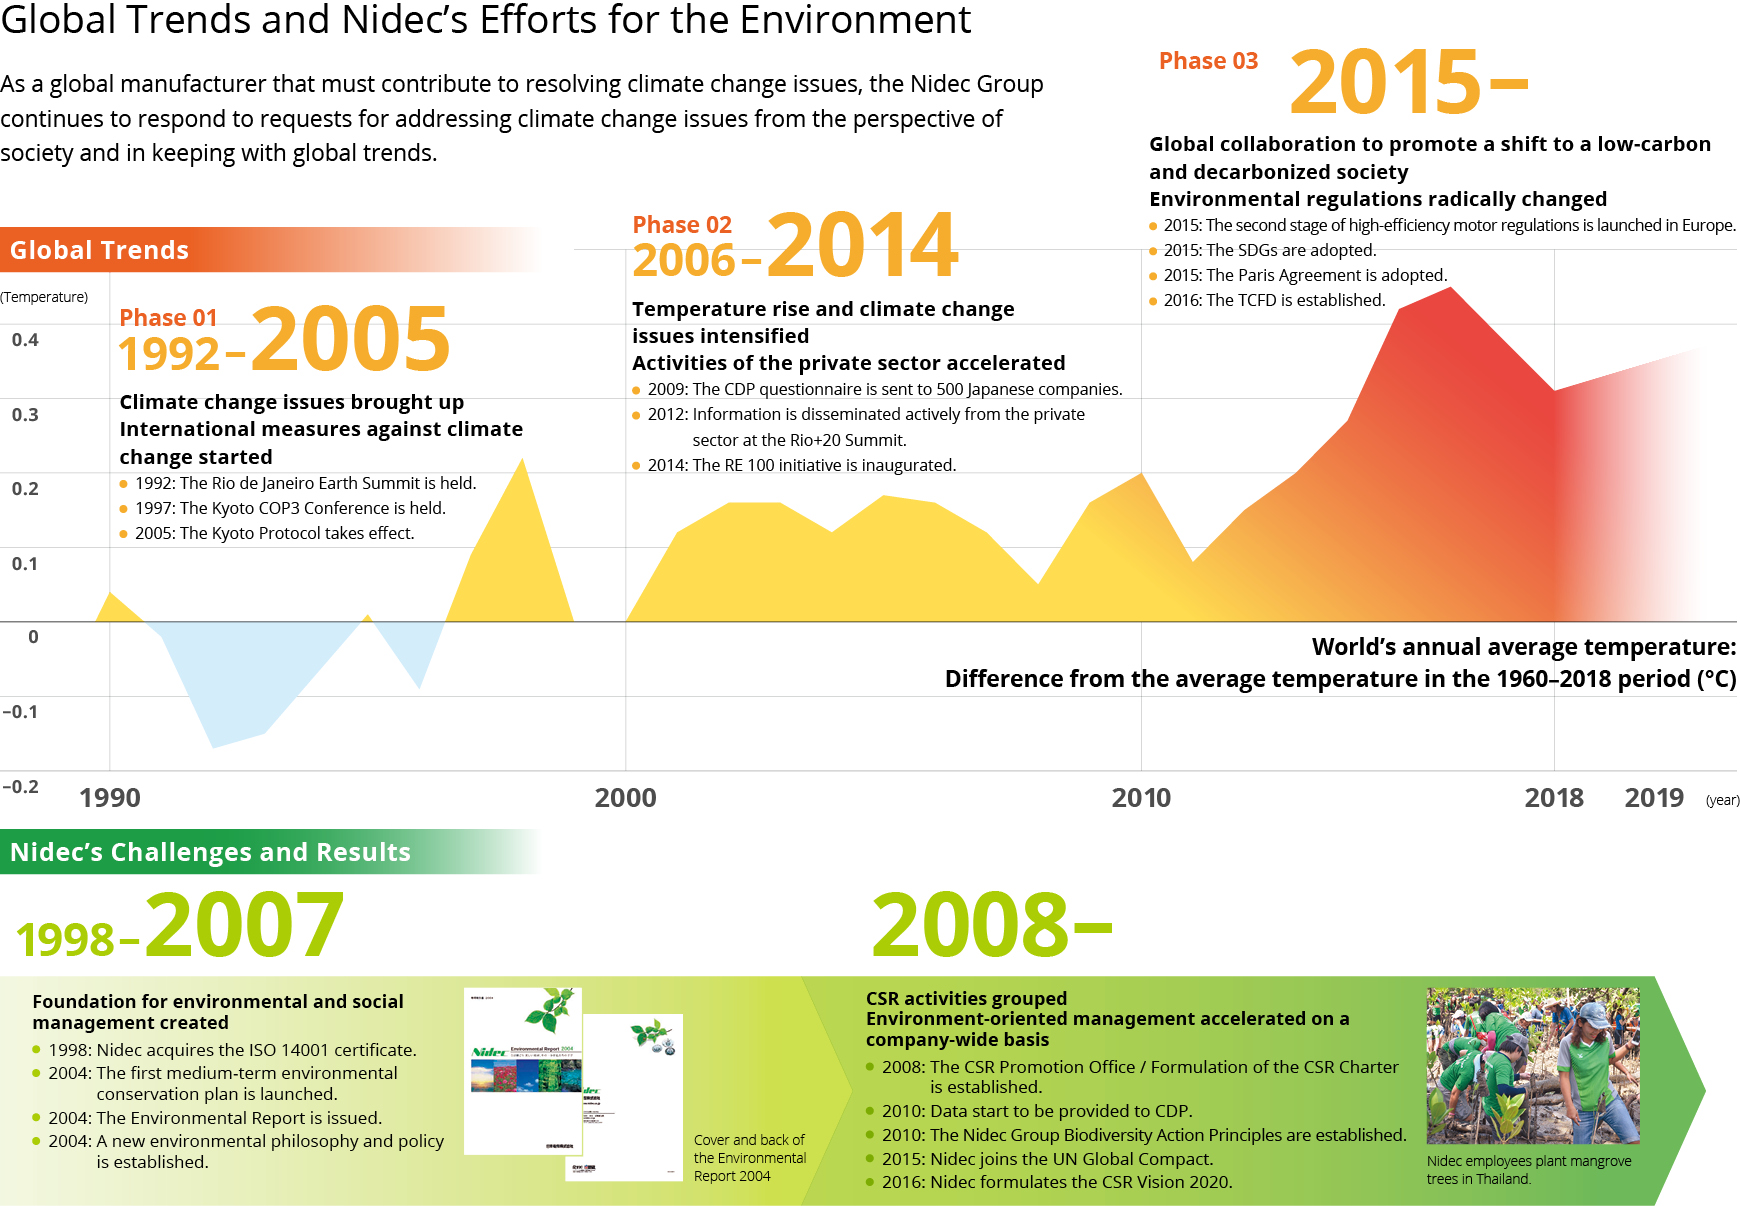 Global Trends and Nidec's Efforts for the Environment